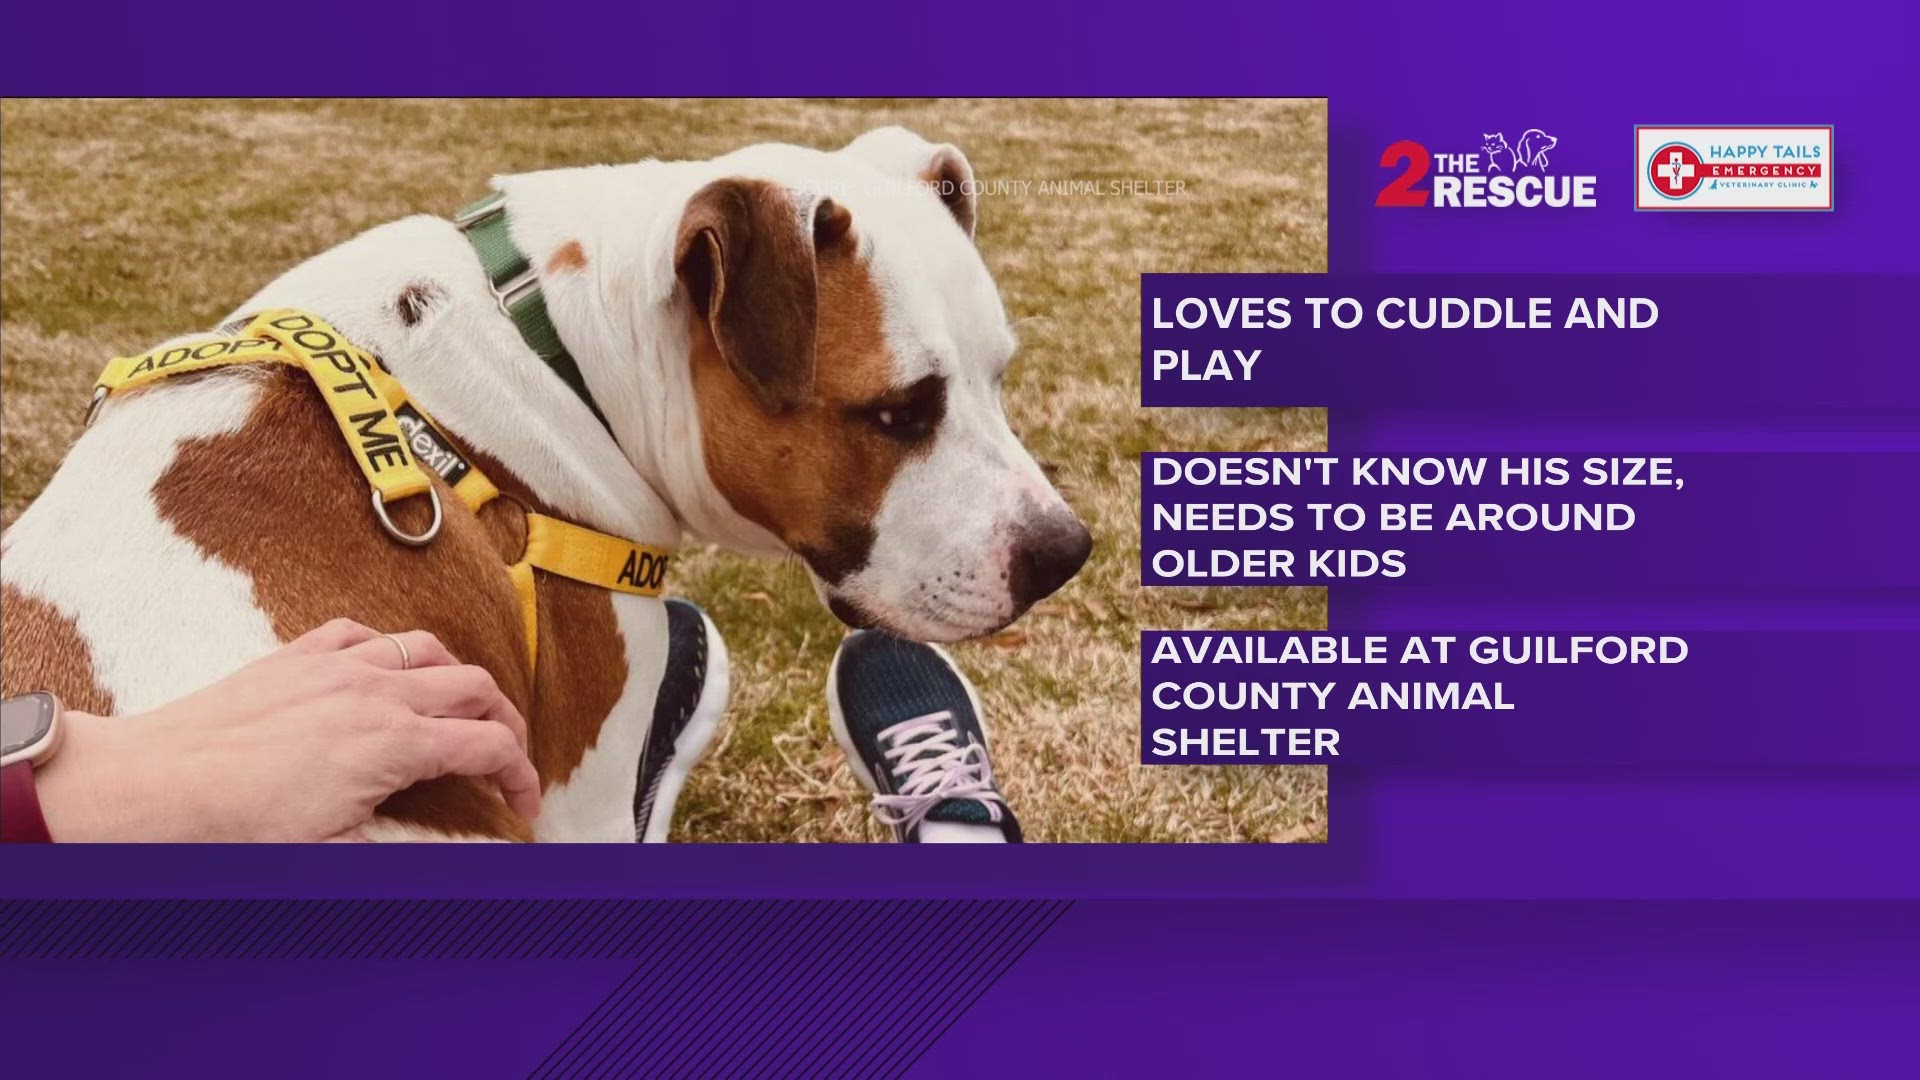 This sweet, big boy is available for adoption at Guilford County Animal Shelter. Let's get him adopted!